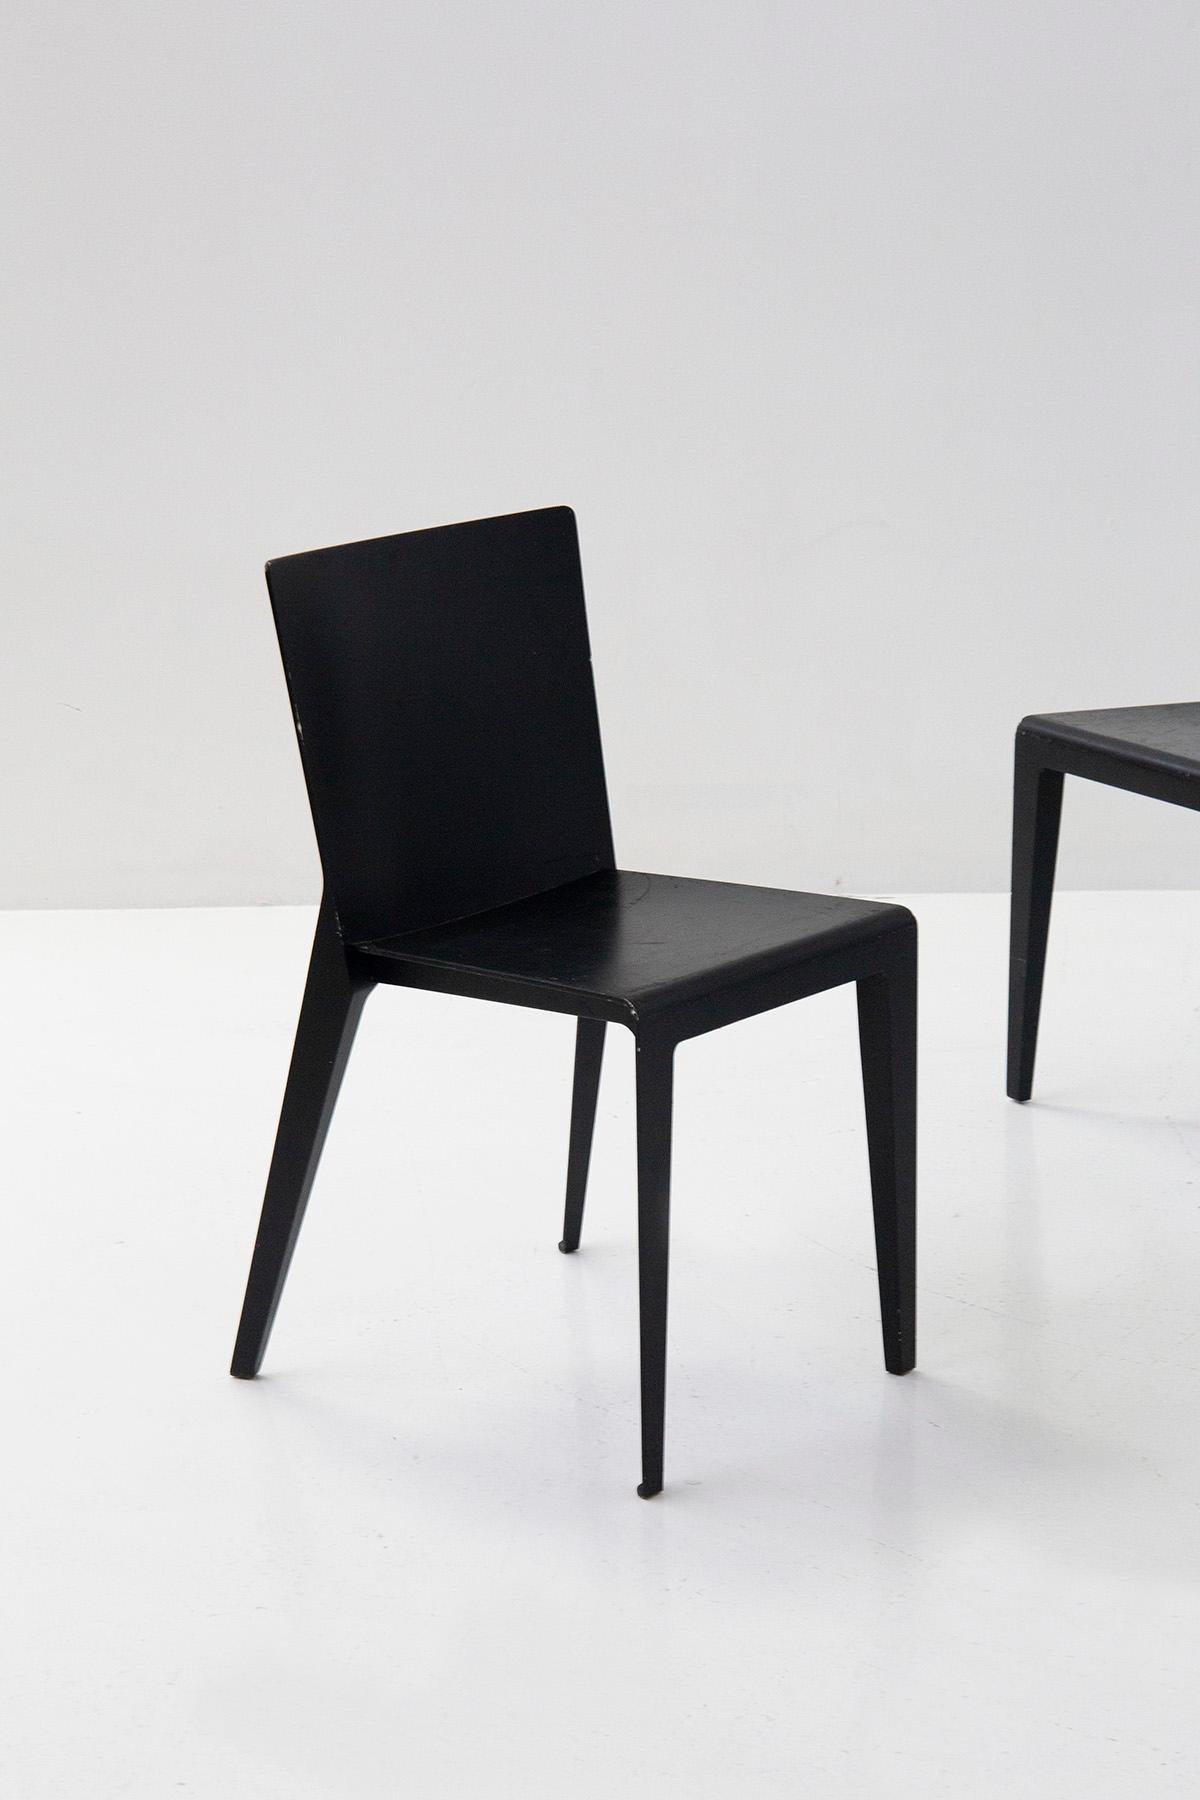 Italian Molteni Chairs Set of Five Model Alfa by Hannes Wettstein For Sale